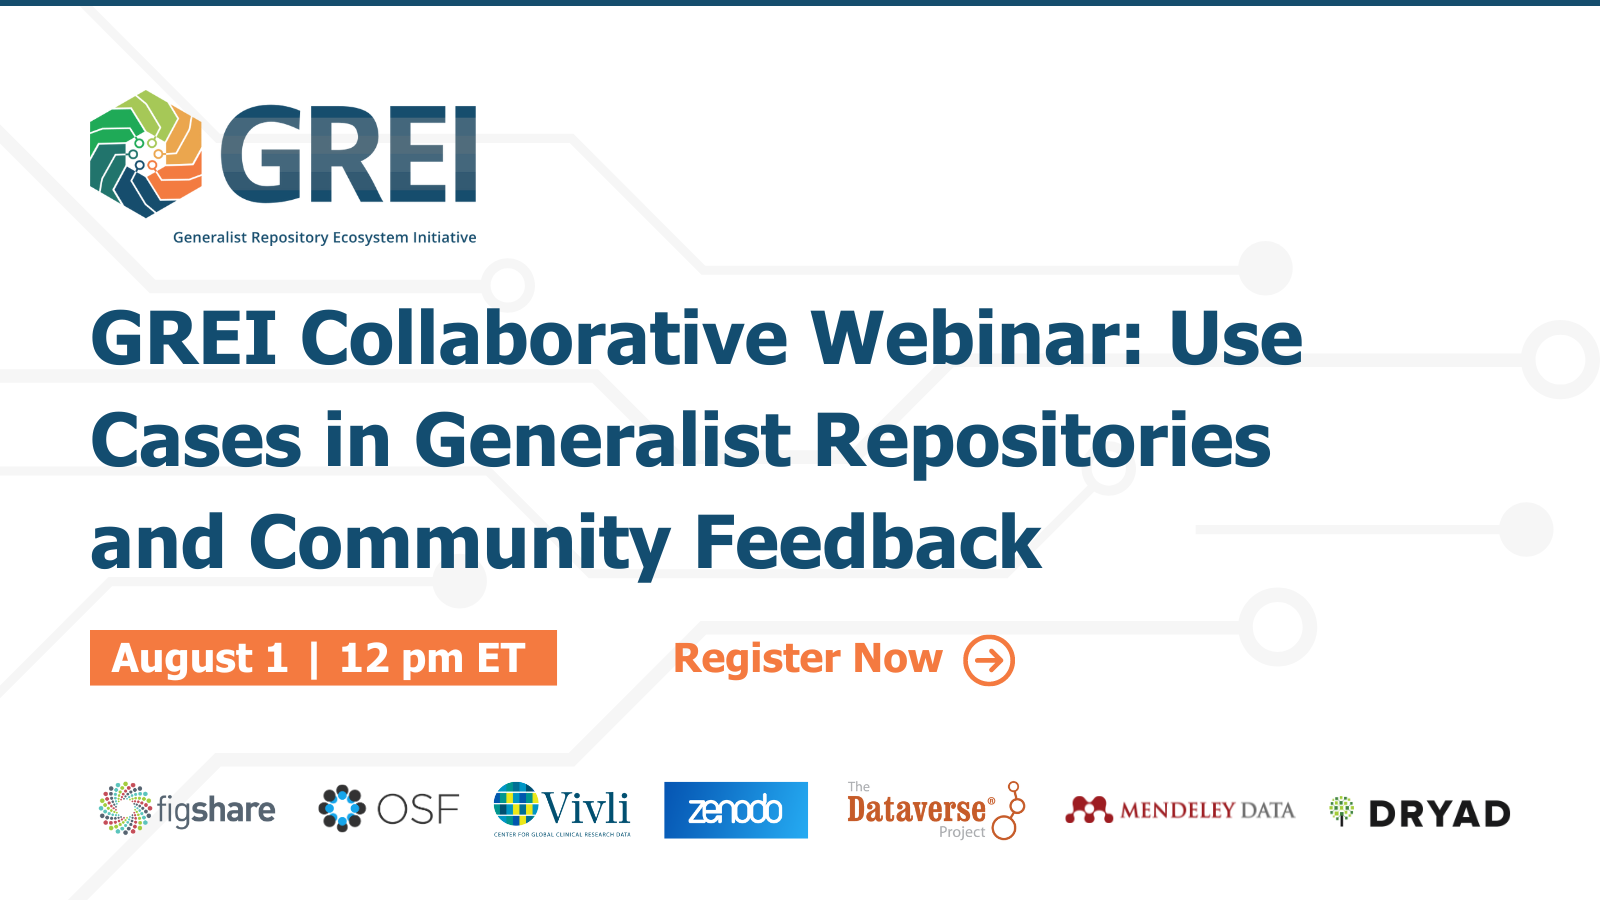 GREI Collaborative Webinar: Use Cases in Generalist Repositories and Community Feedback